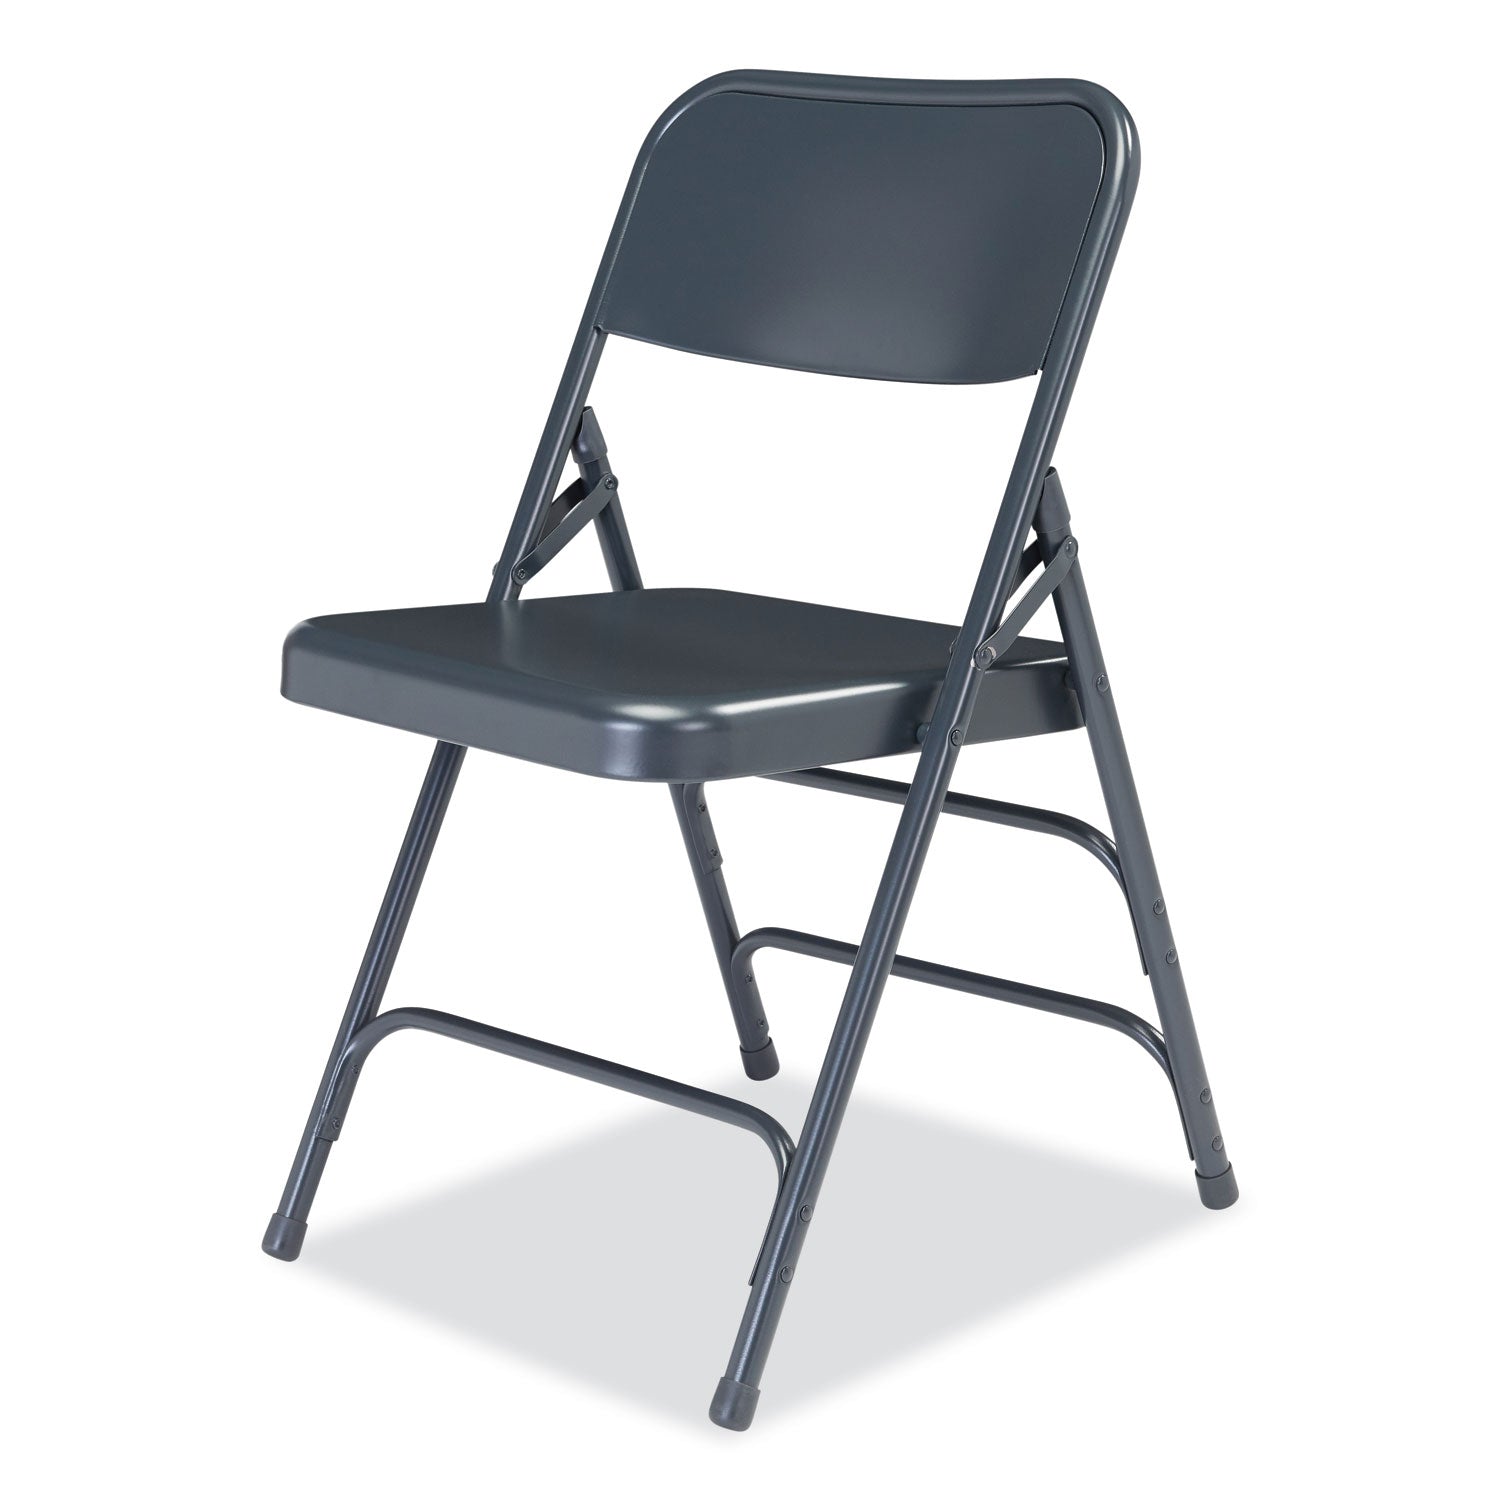 300-series-deluxe-all-steel-triple-brace-folding-chair-supports-480-lb-1725-seat-height-blue-4-ctships-in-1-3-bus-days_nps304 - 3